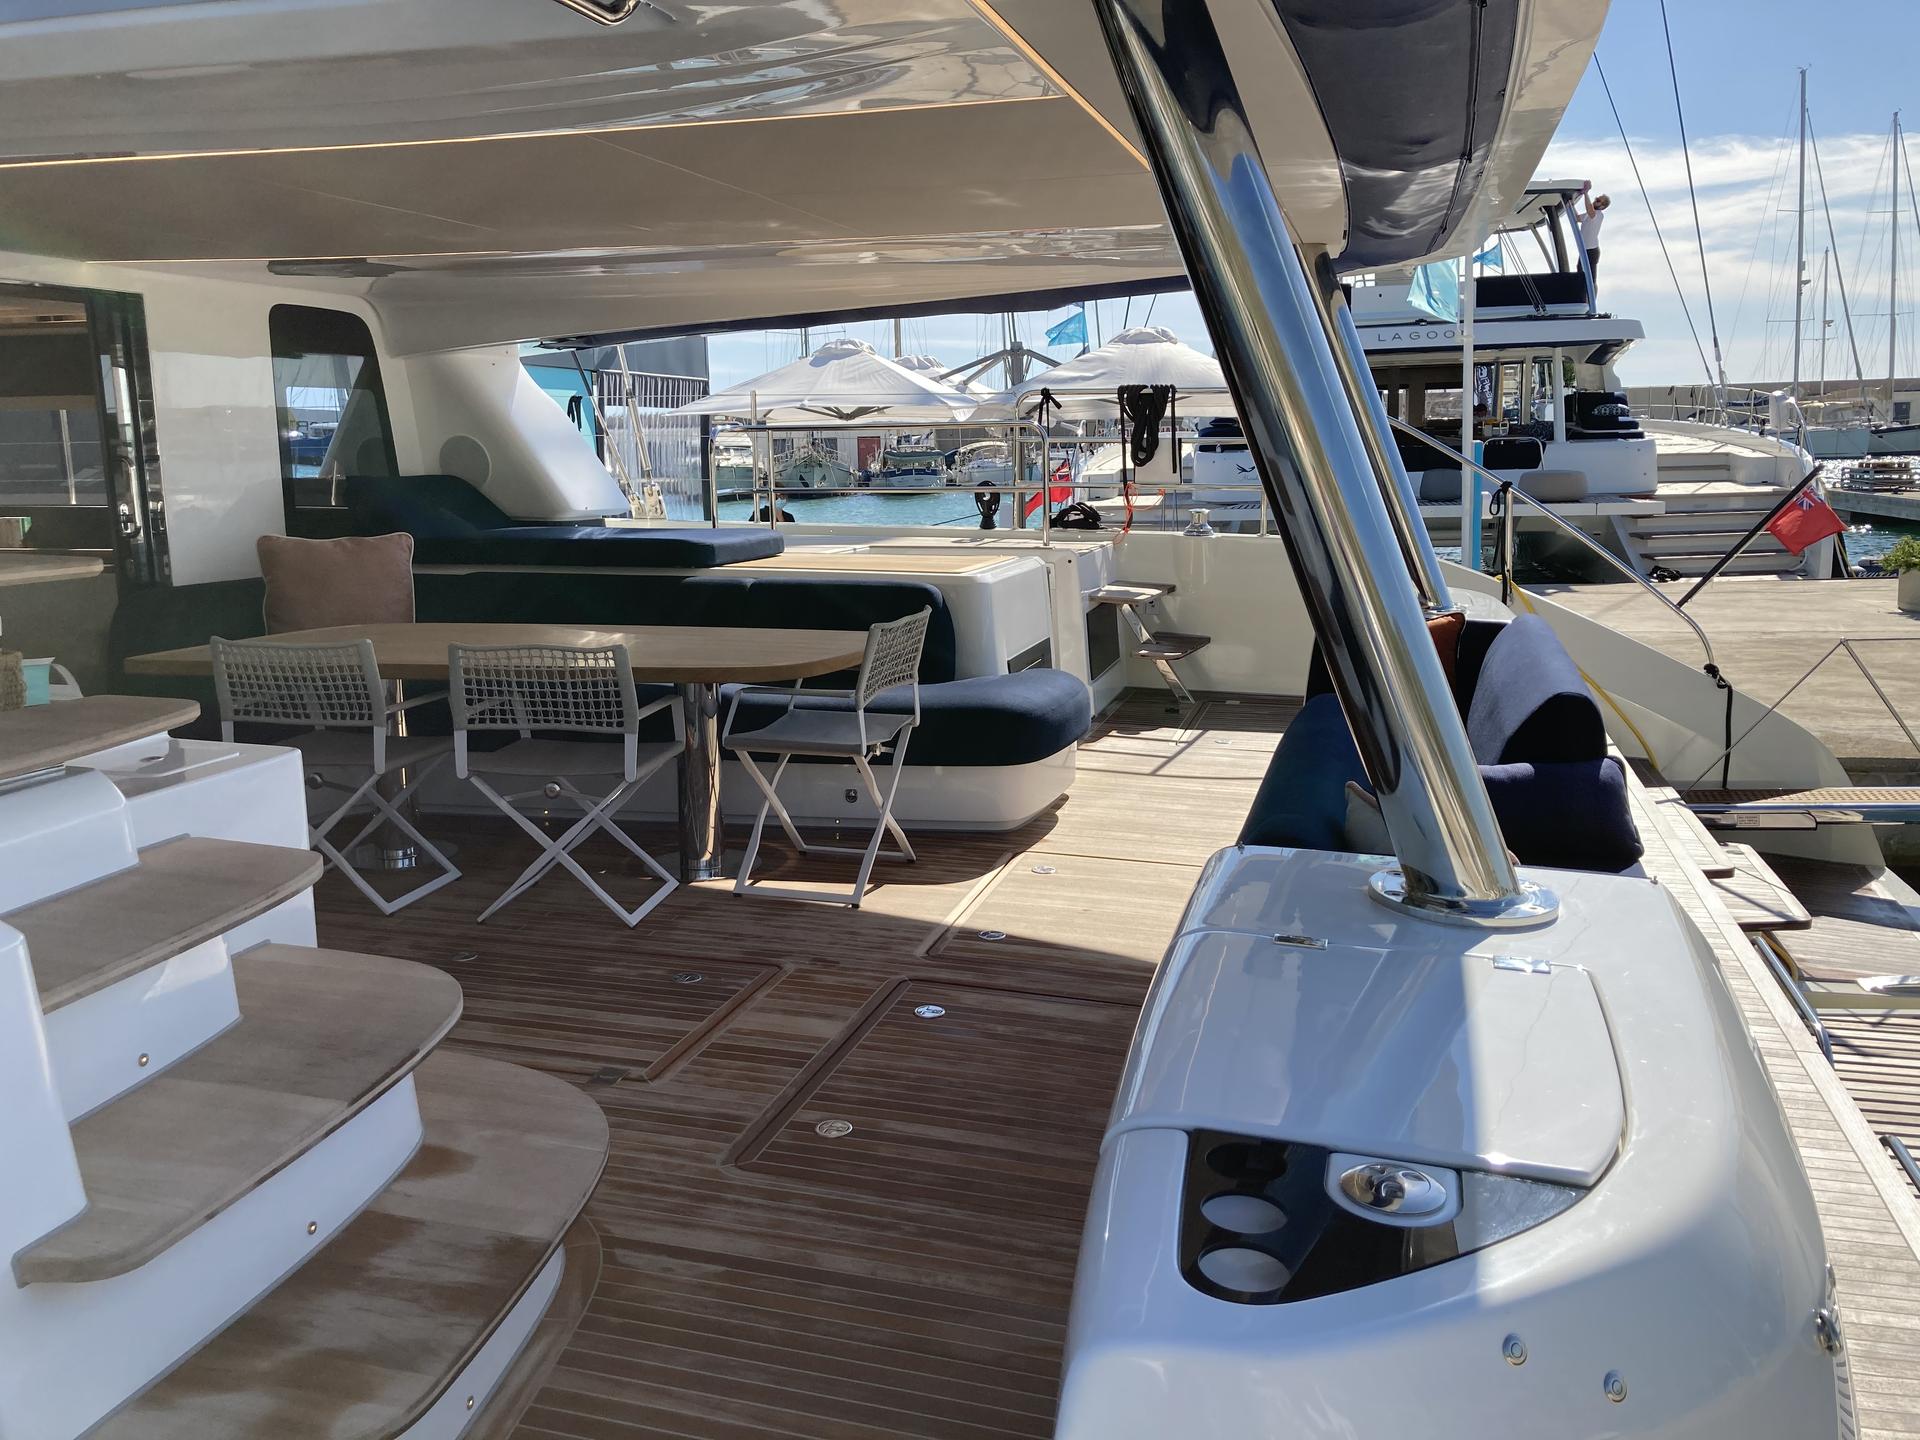 Amada Mia Lagoon Sixty 5, a luxury catamaran with room for socializing & relaxing, comfortable sailing experience - High Point Yachting